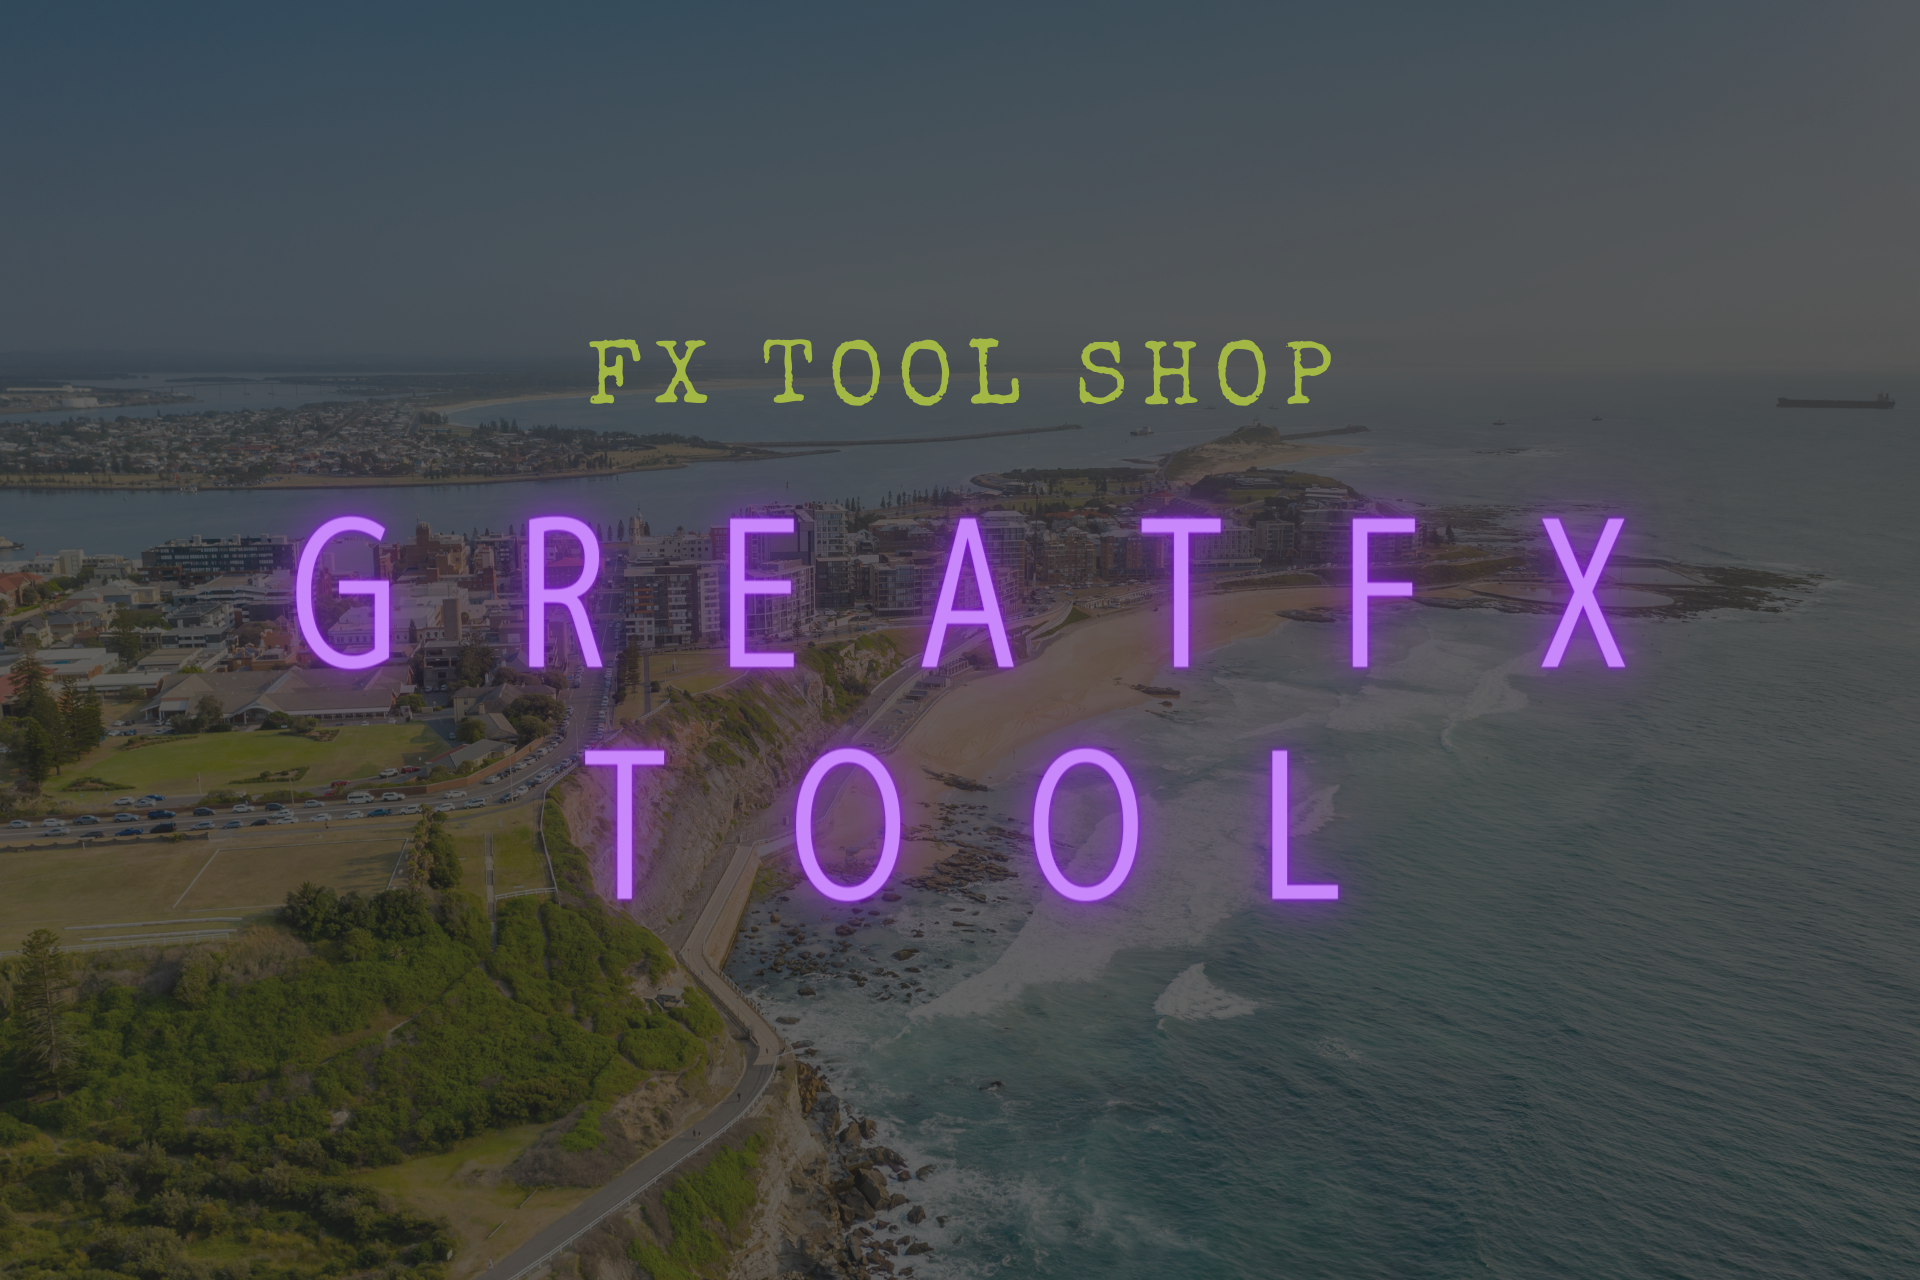 GREAT FX TOOL